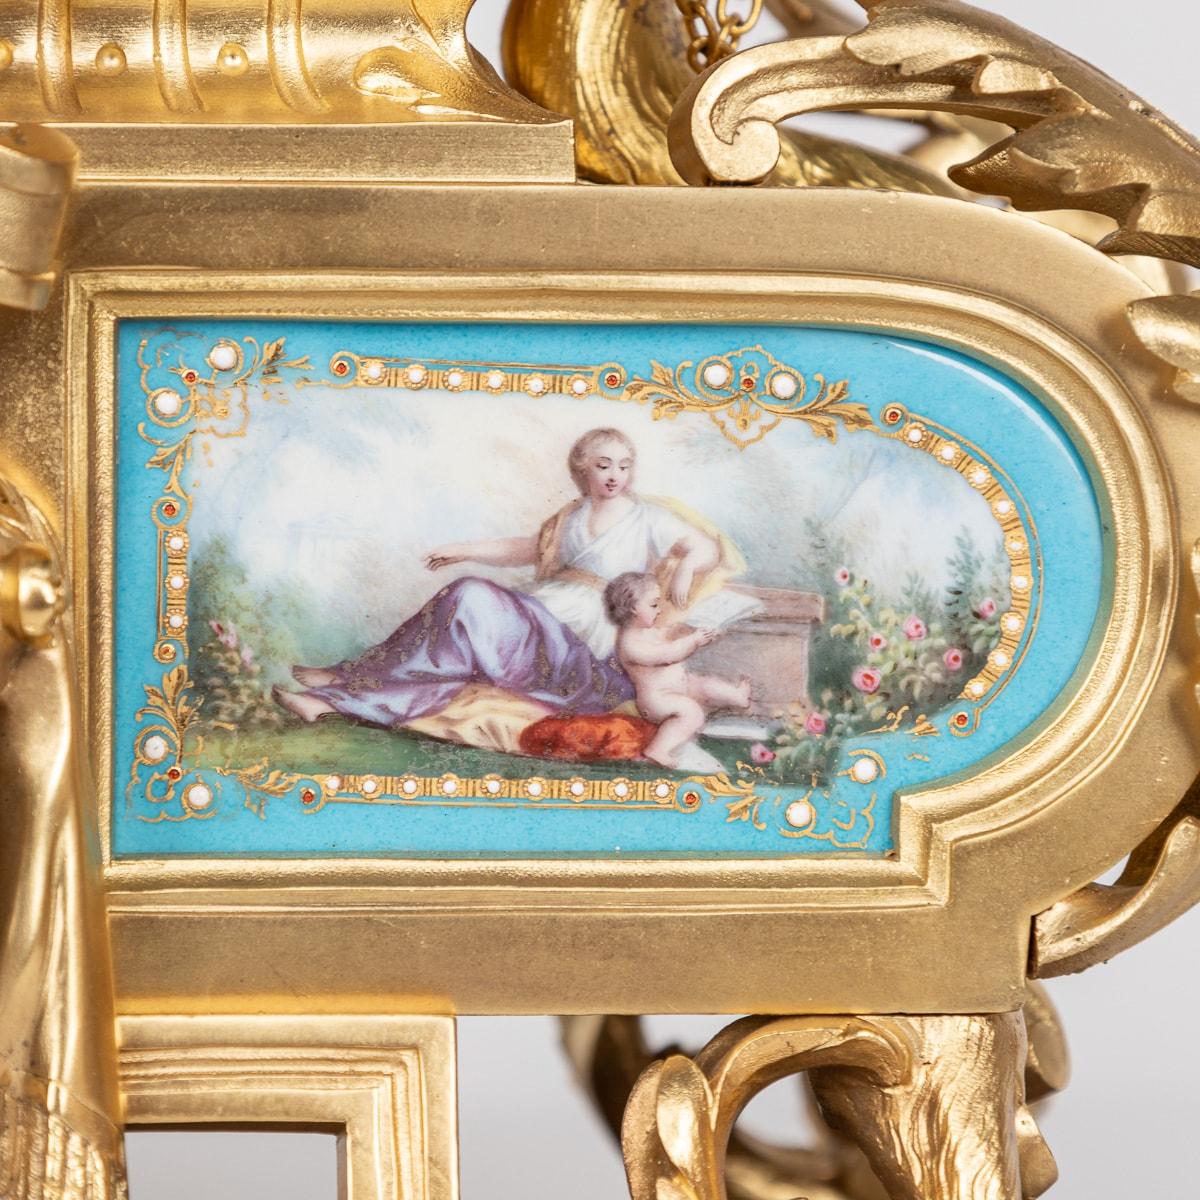 19th Century French Ormolu Mounted Sevres Style Porcelain Mantle Clock c.1870 For Sale 12